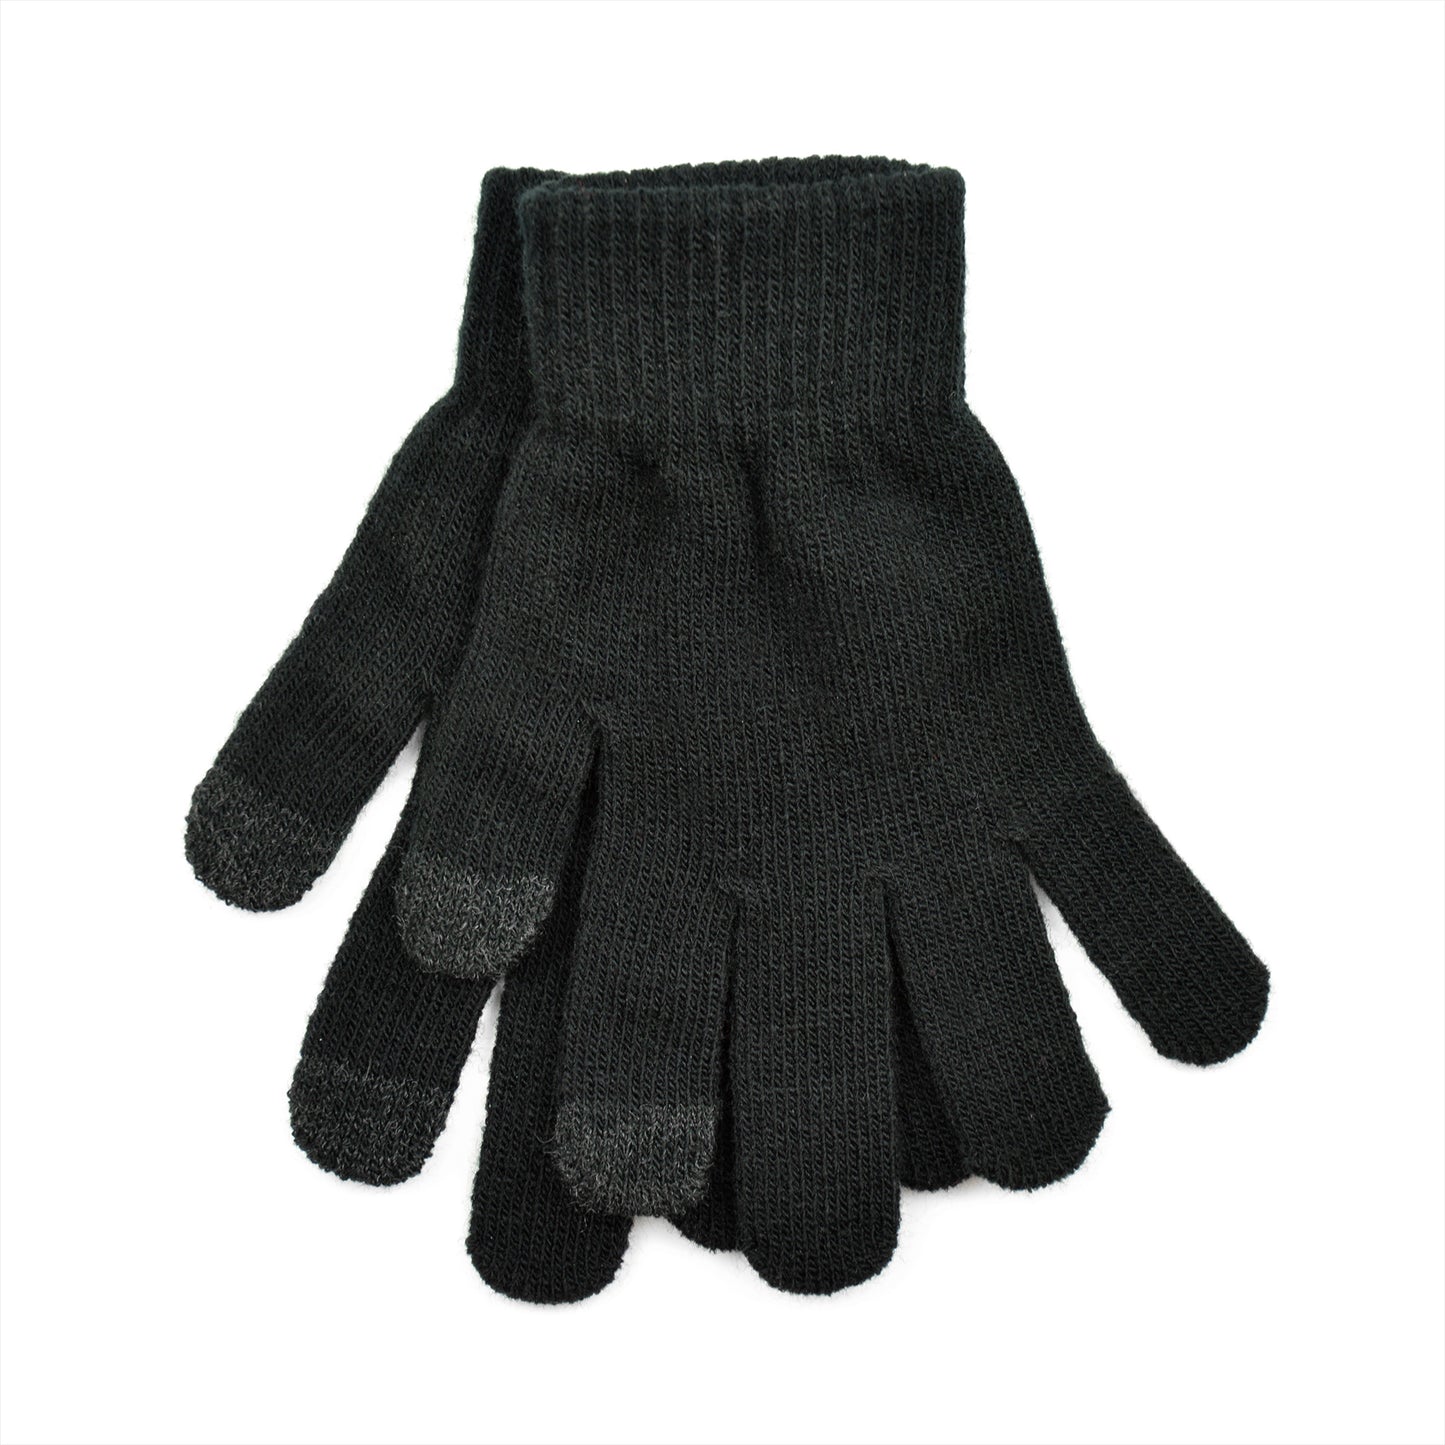 2 Pairs Ladies Knitted Touch Screen Phone Gloves - Various Colours